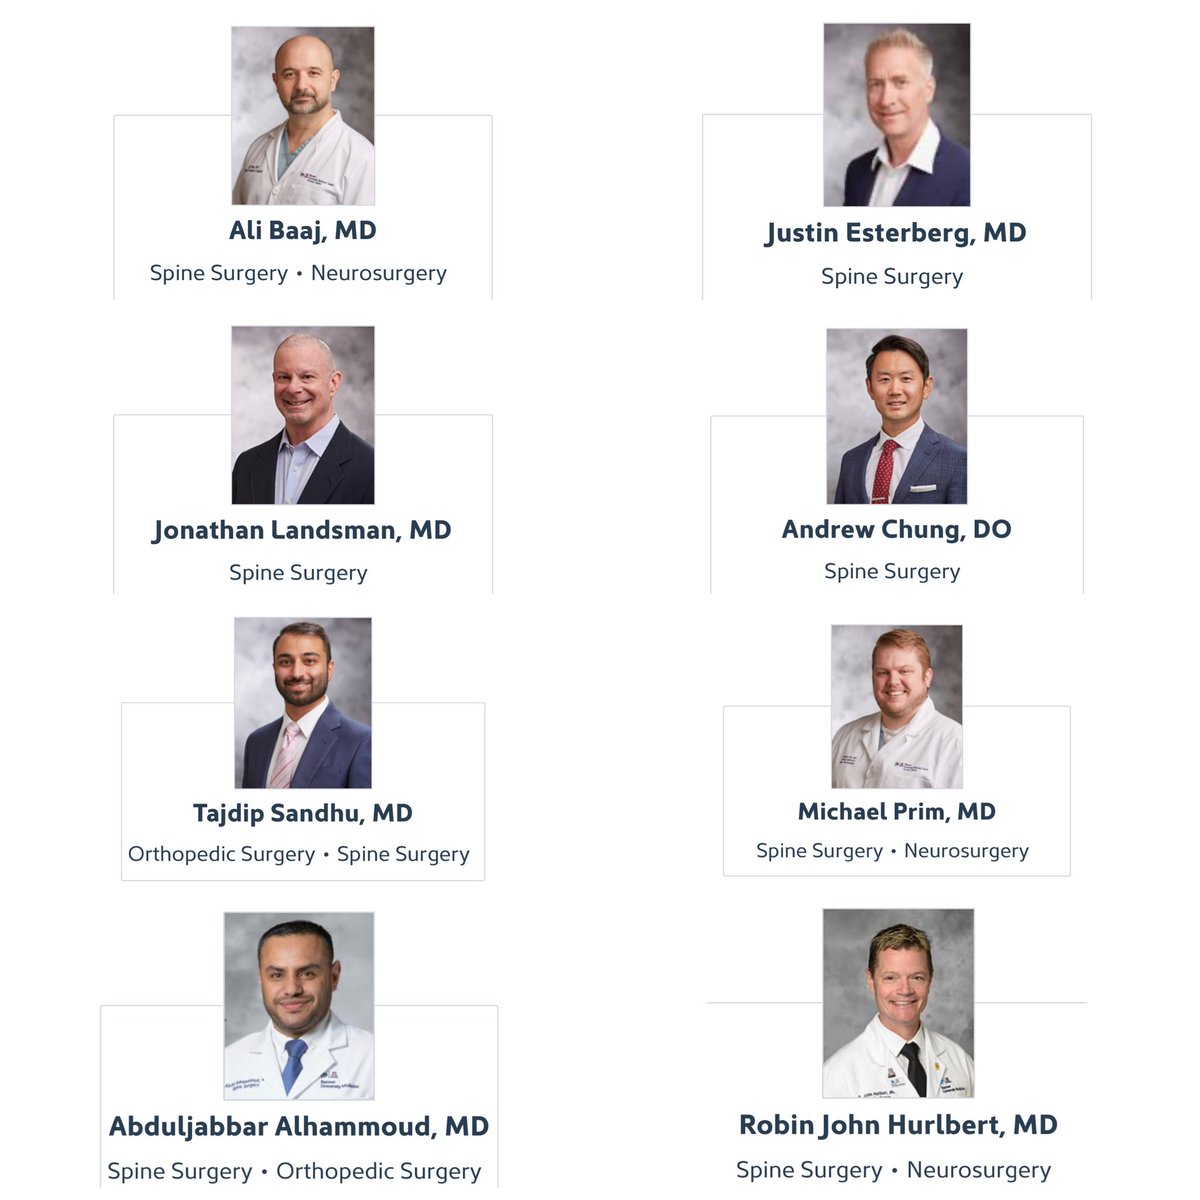 Happy National Doctors Day to my spine-dedicated colleagues in neurosurgery and orthopedic surgery across our #Banner system in #Arizona! Together we’re ensuring that the largest health system in the state is also the BEST one for the delivery of evidence-based,